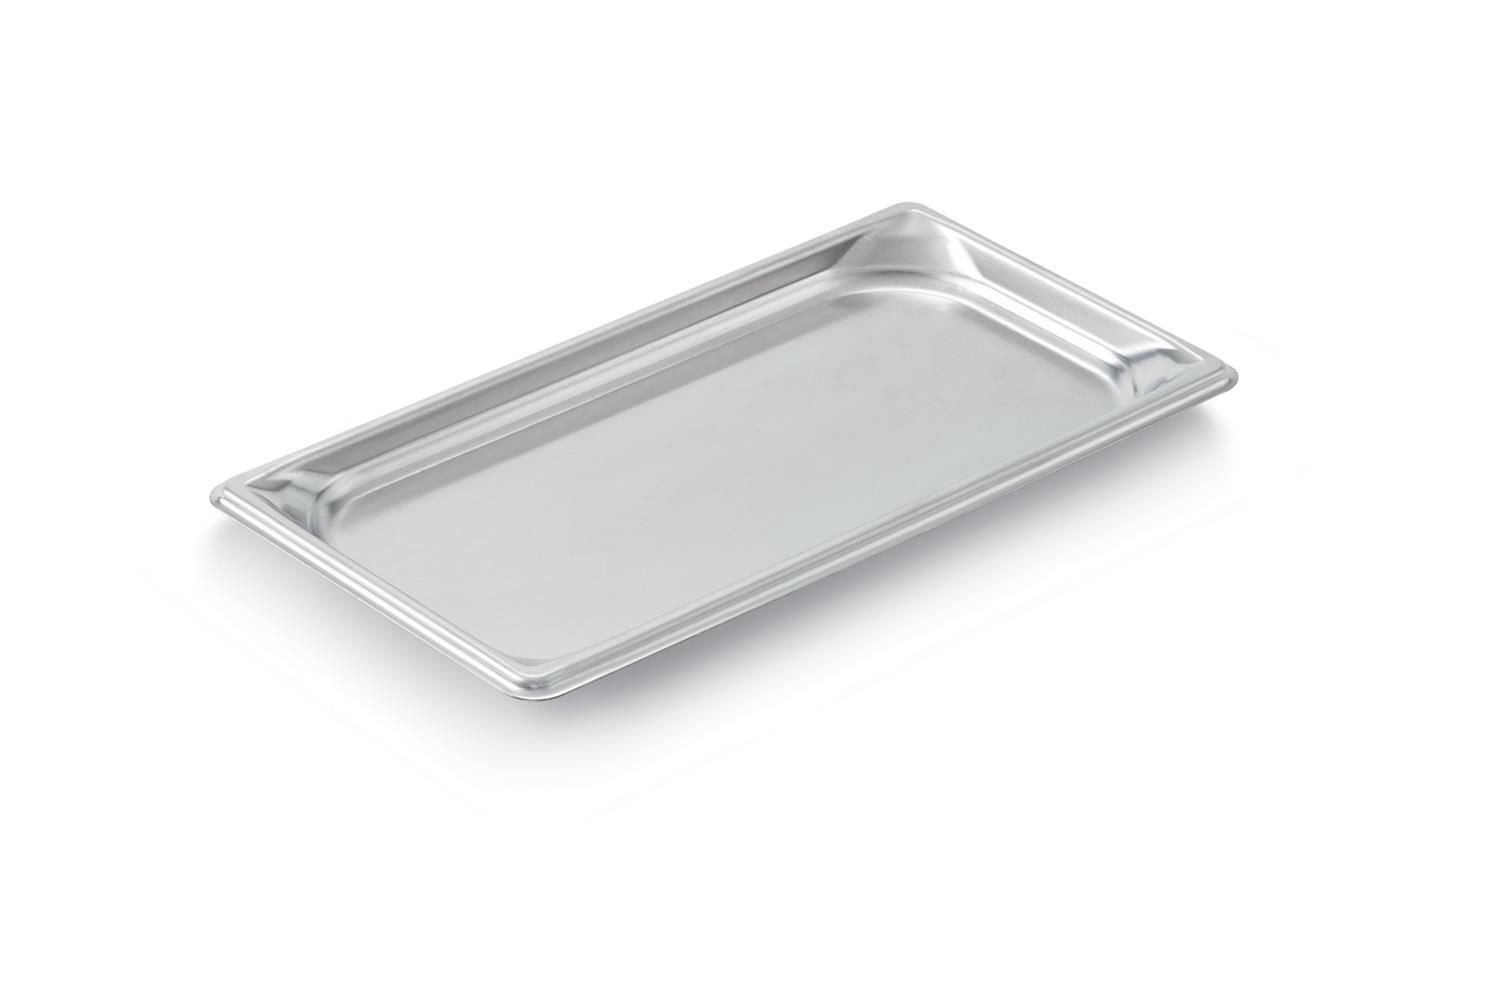 Vollrath 30302 Super Pan V 1/3 Size Stainless Steel Steam Table Pan